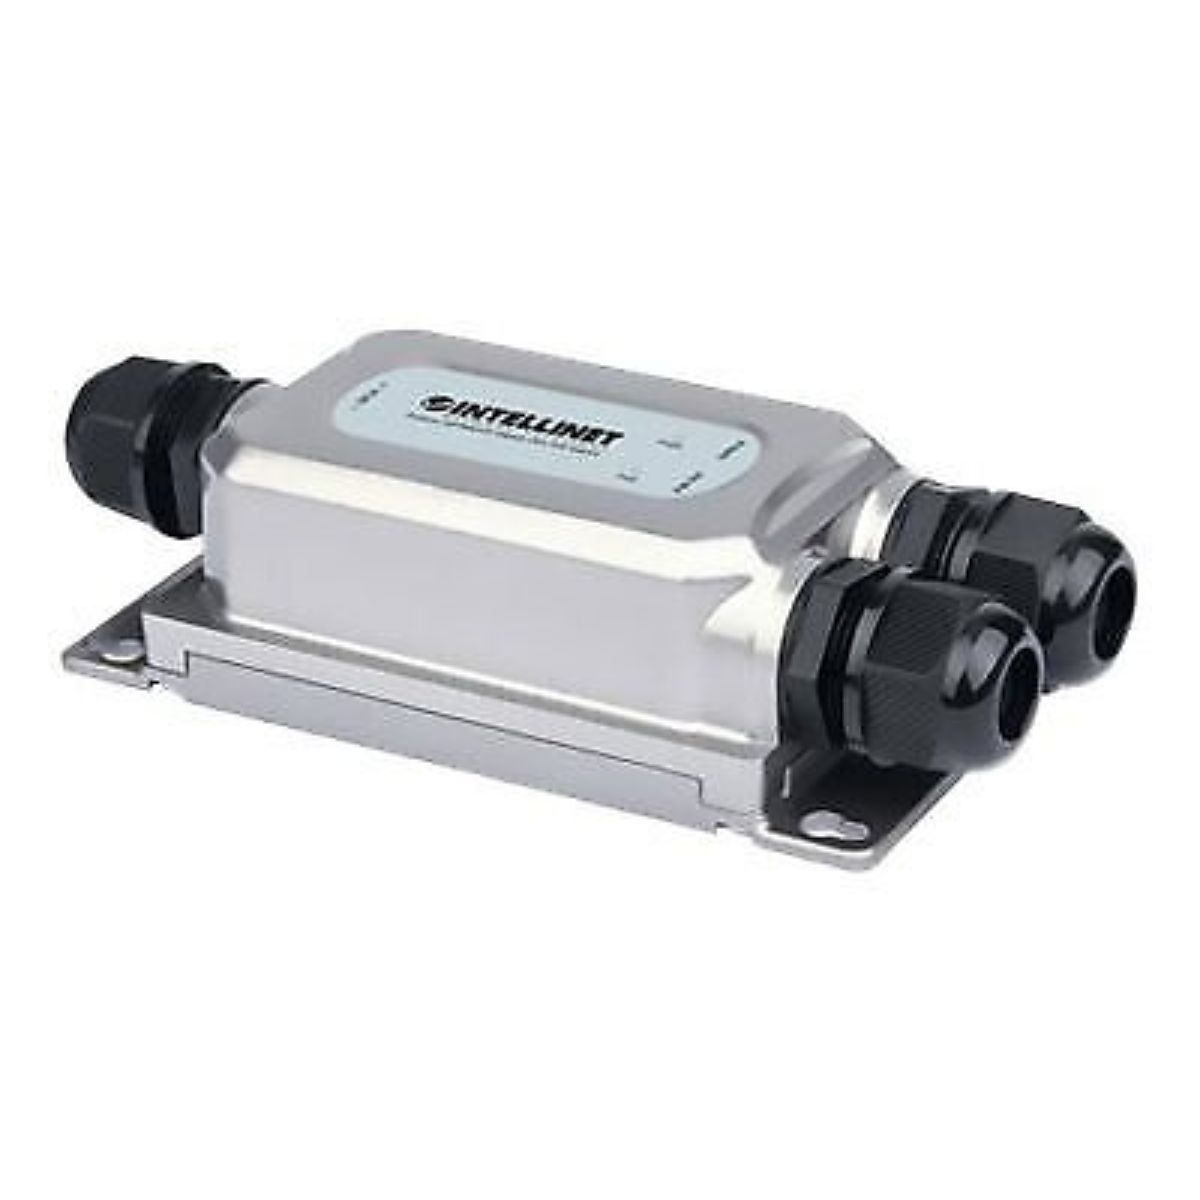 "High-Power Outdoor POE Injector: 60W, One-Port Metal Housing for Enhanced Connectivity and Durability"